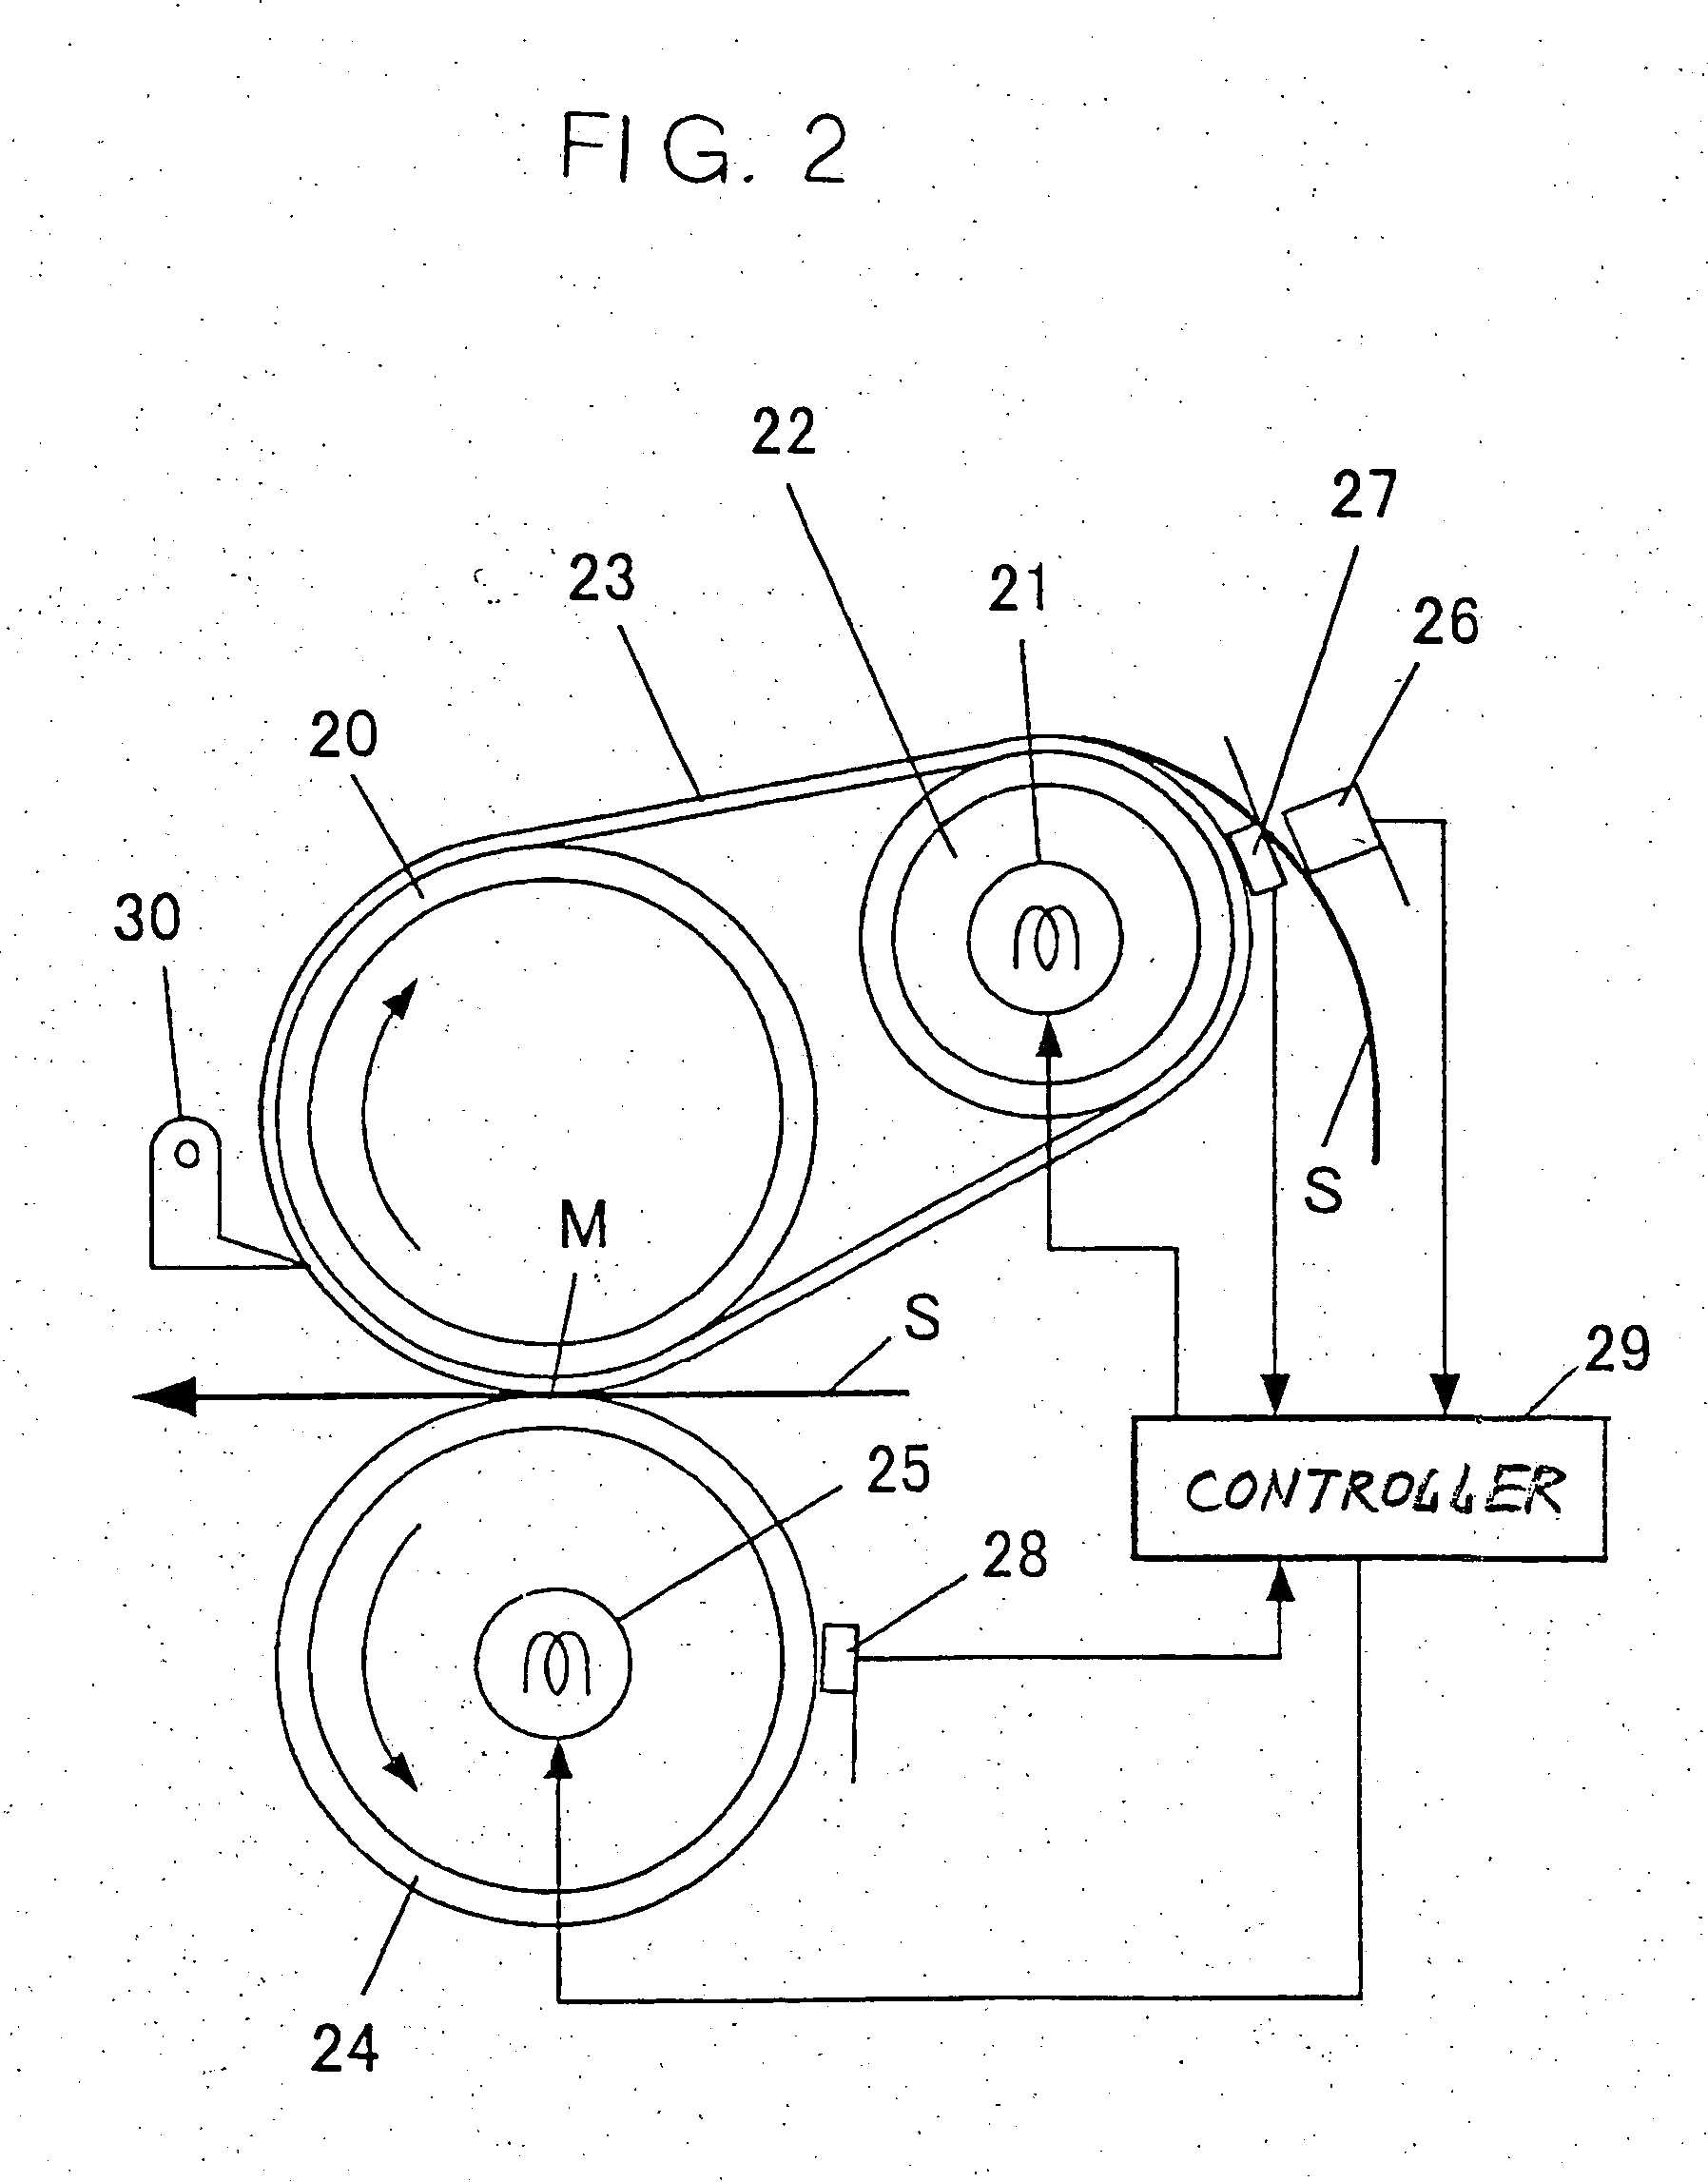 Belt type fixing device for use in an image forming apparatus